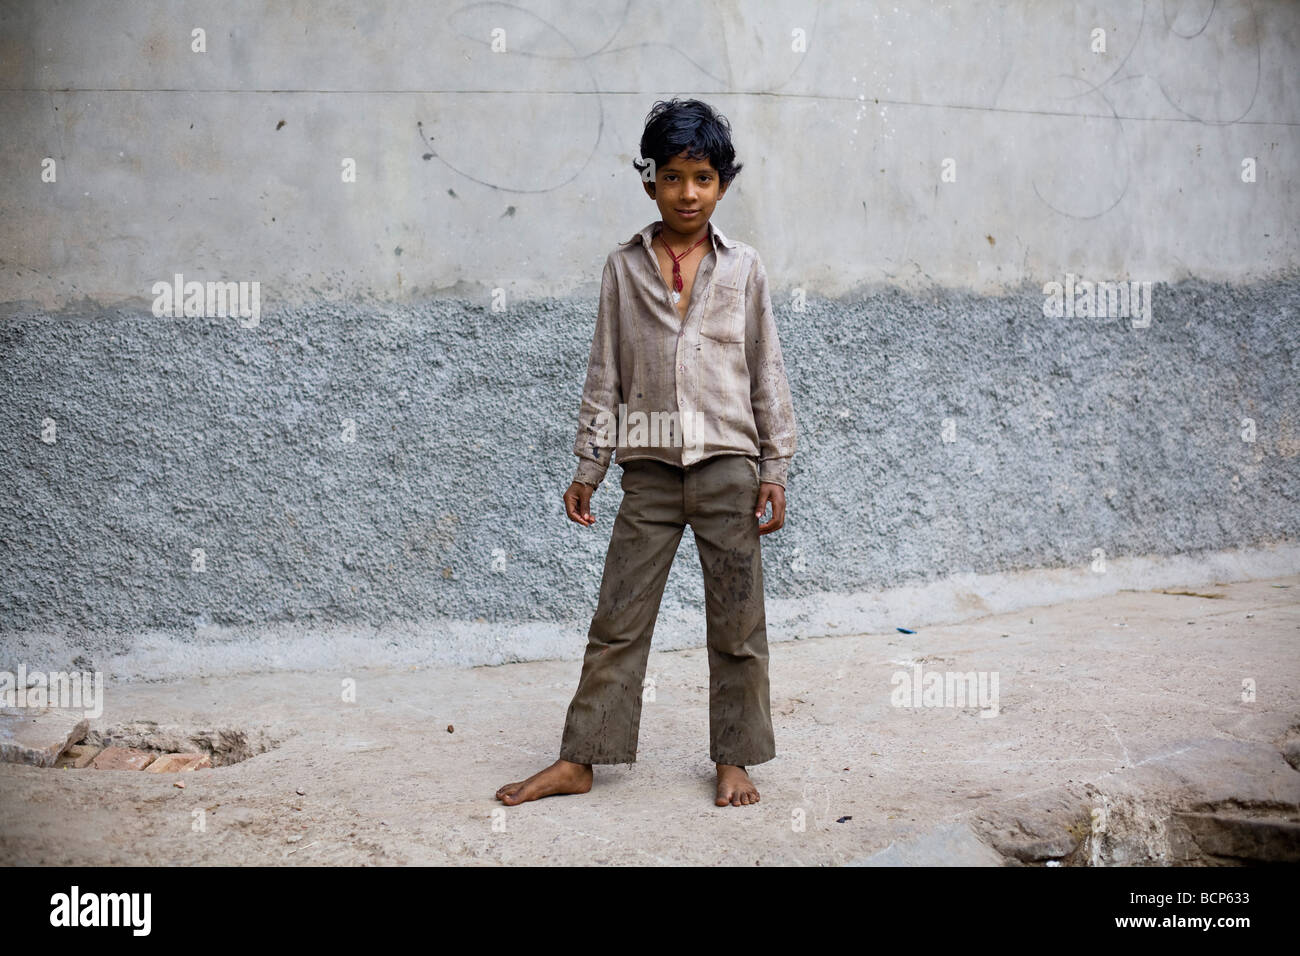 A portrait of a young boy in Jodhpur India Stock Photo